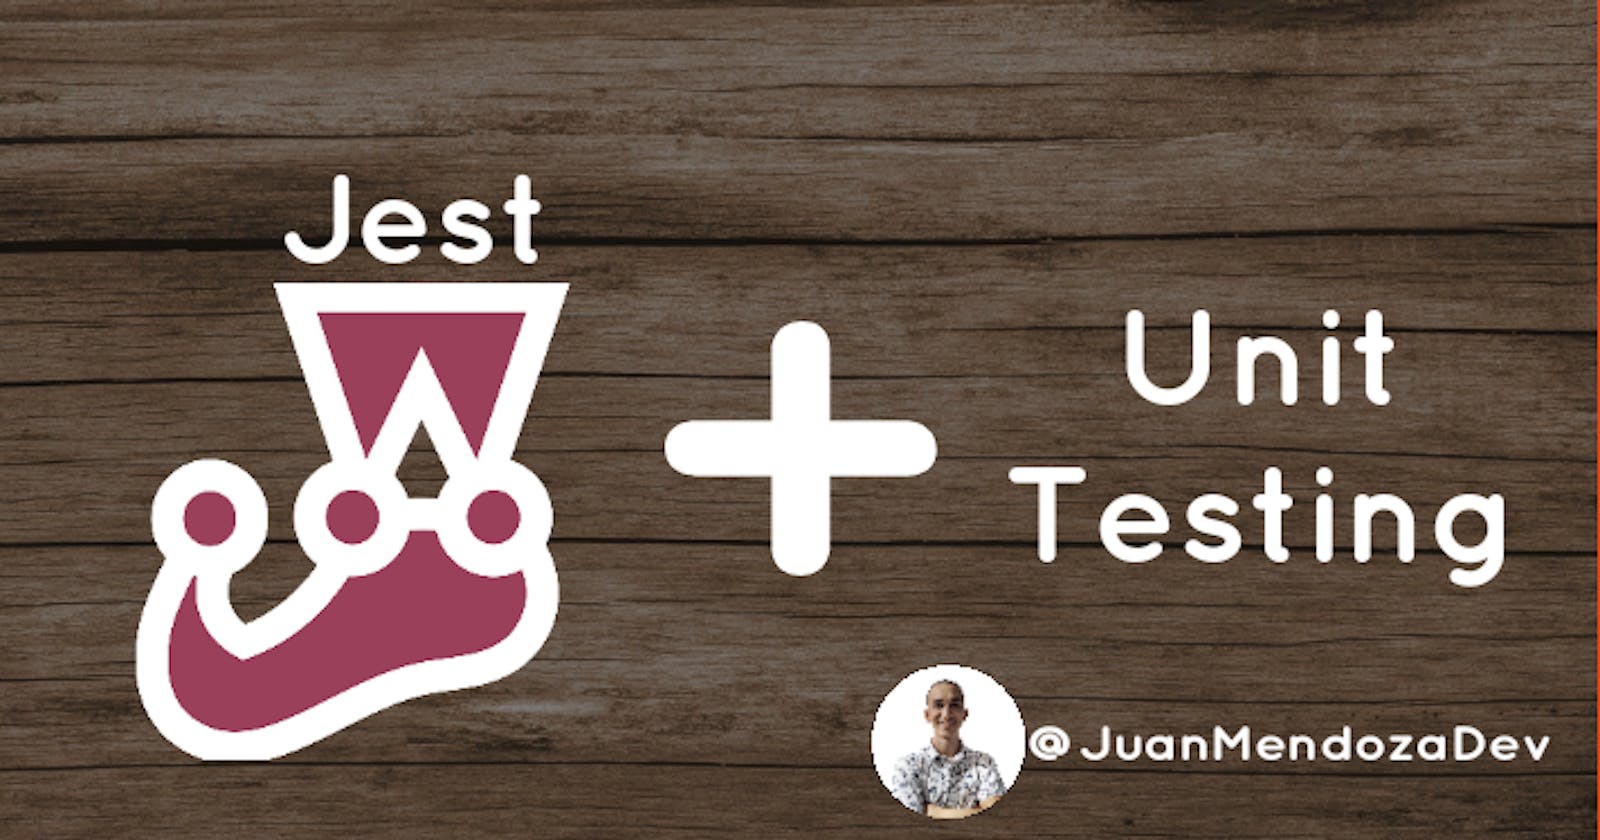 Getting Started with Jest + Unit Testing